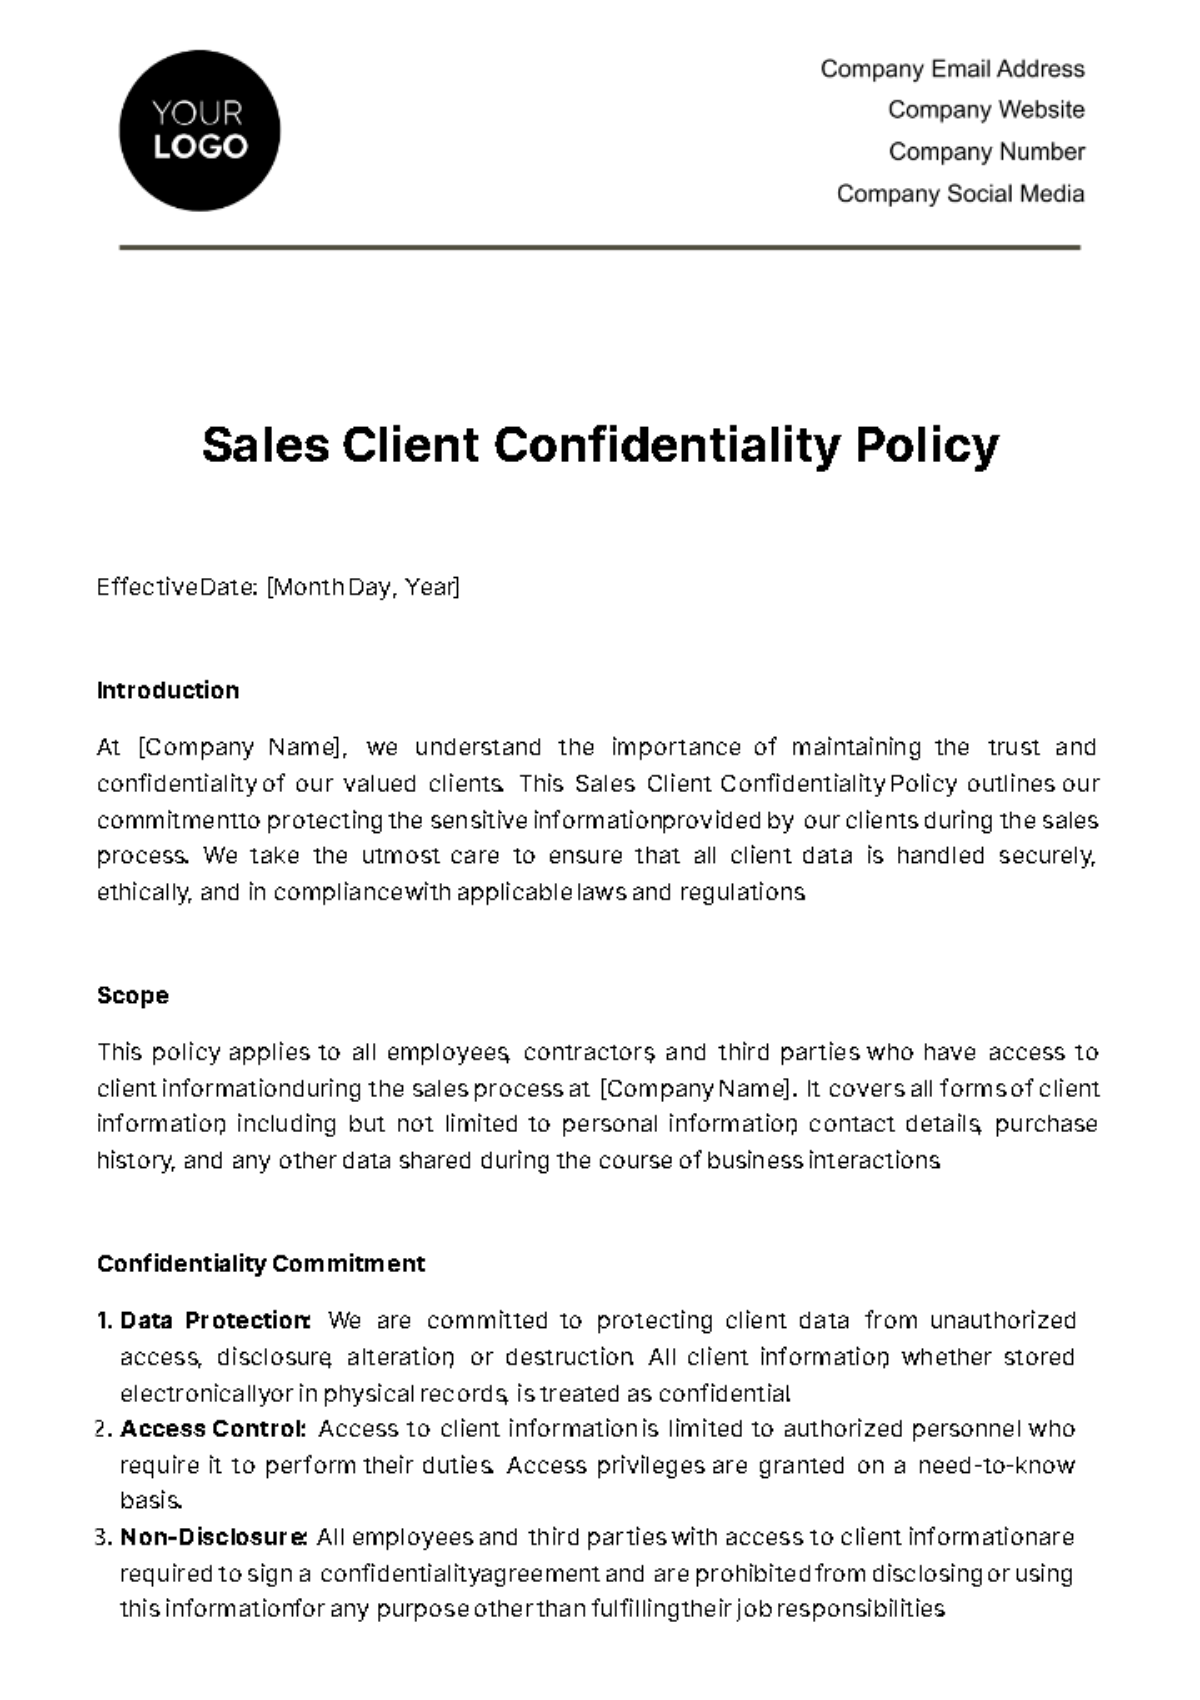 Free Sales Client Confidentiality Policy Template